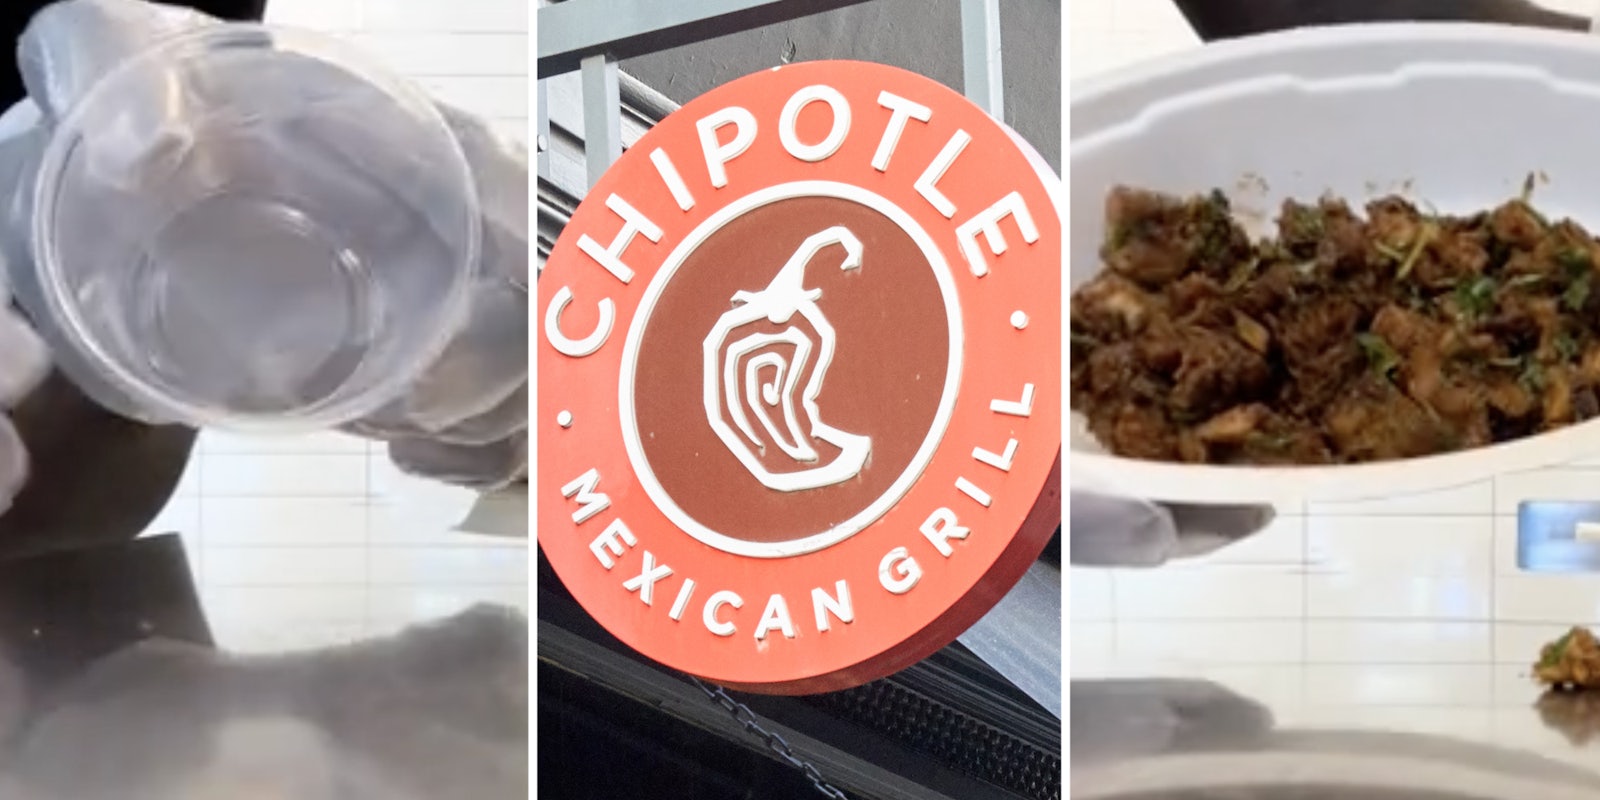 Plastic cup(l), Chipotle sign(c), Bowl with meat(r)